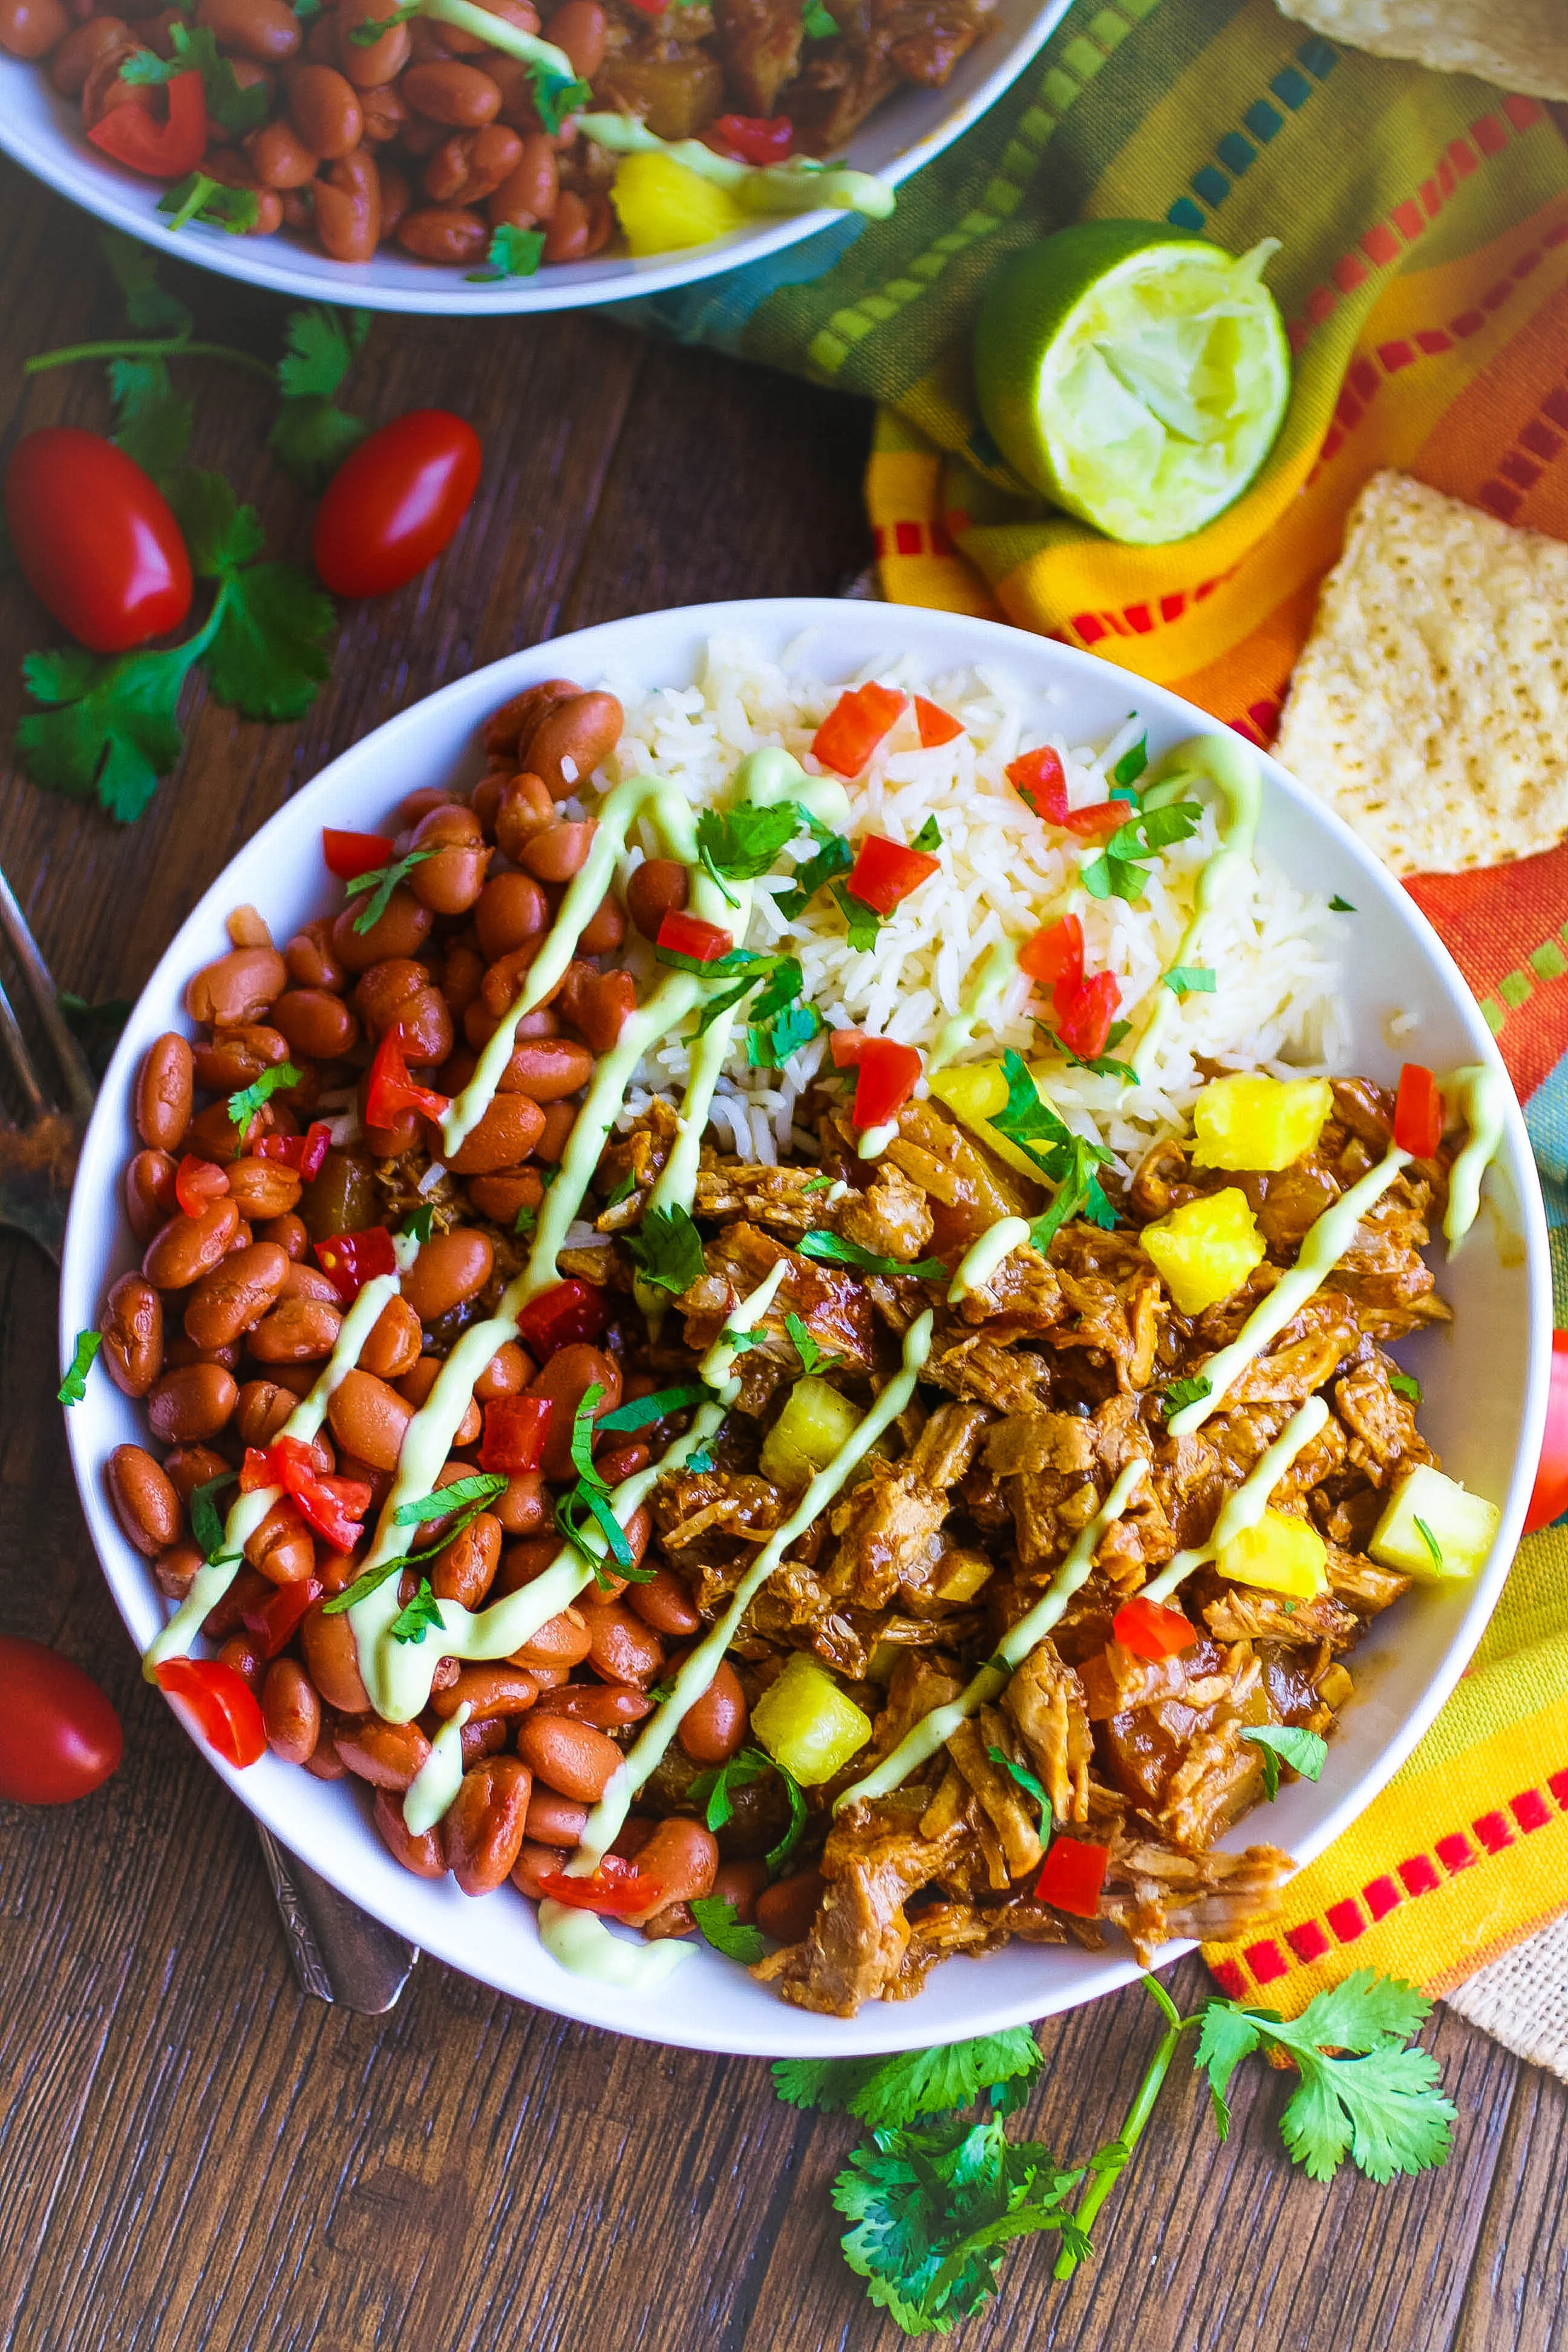 Pork al pastor bowls are a Mexican-inspired favorite in my house. These bowls forgo the taco shells, but you won't miss them!